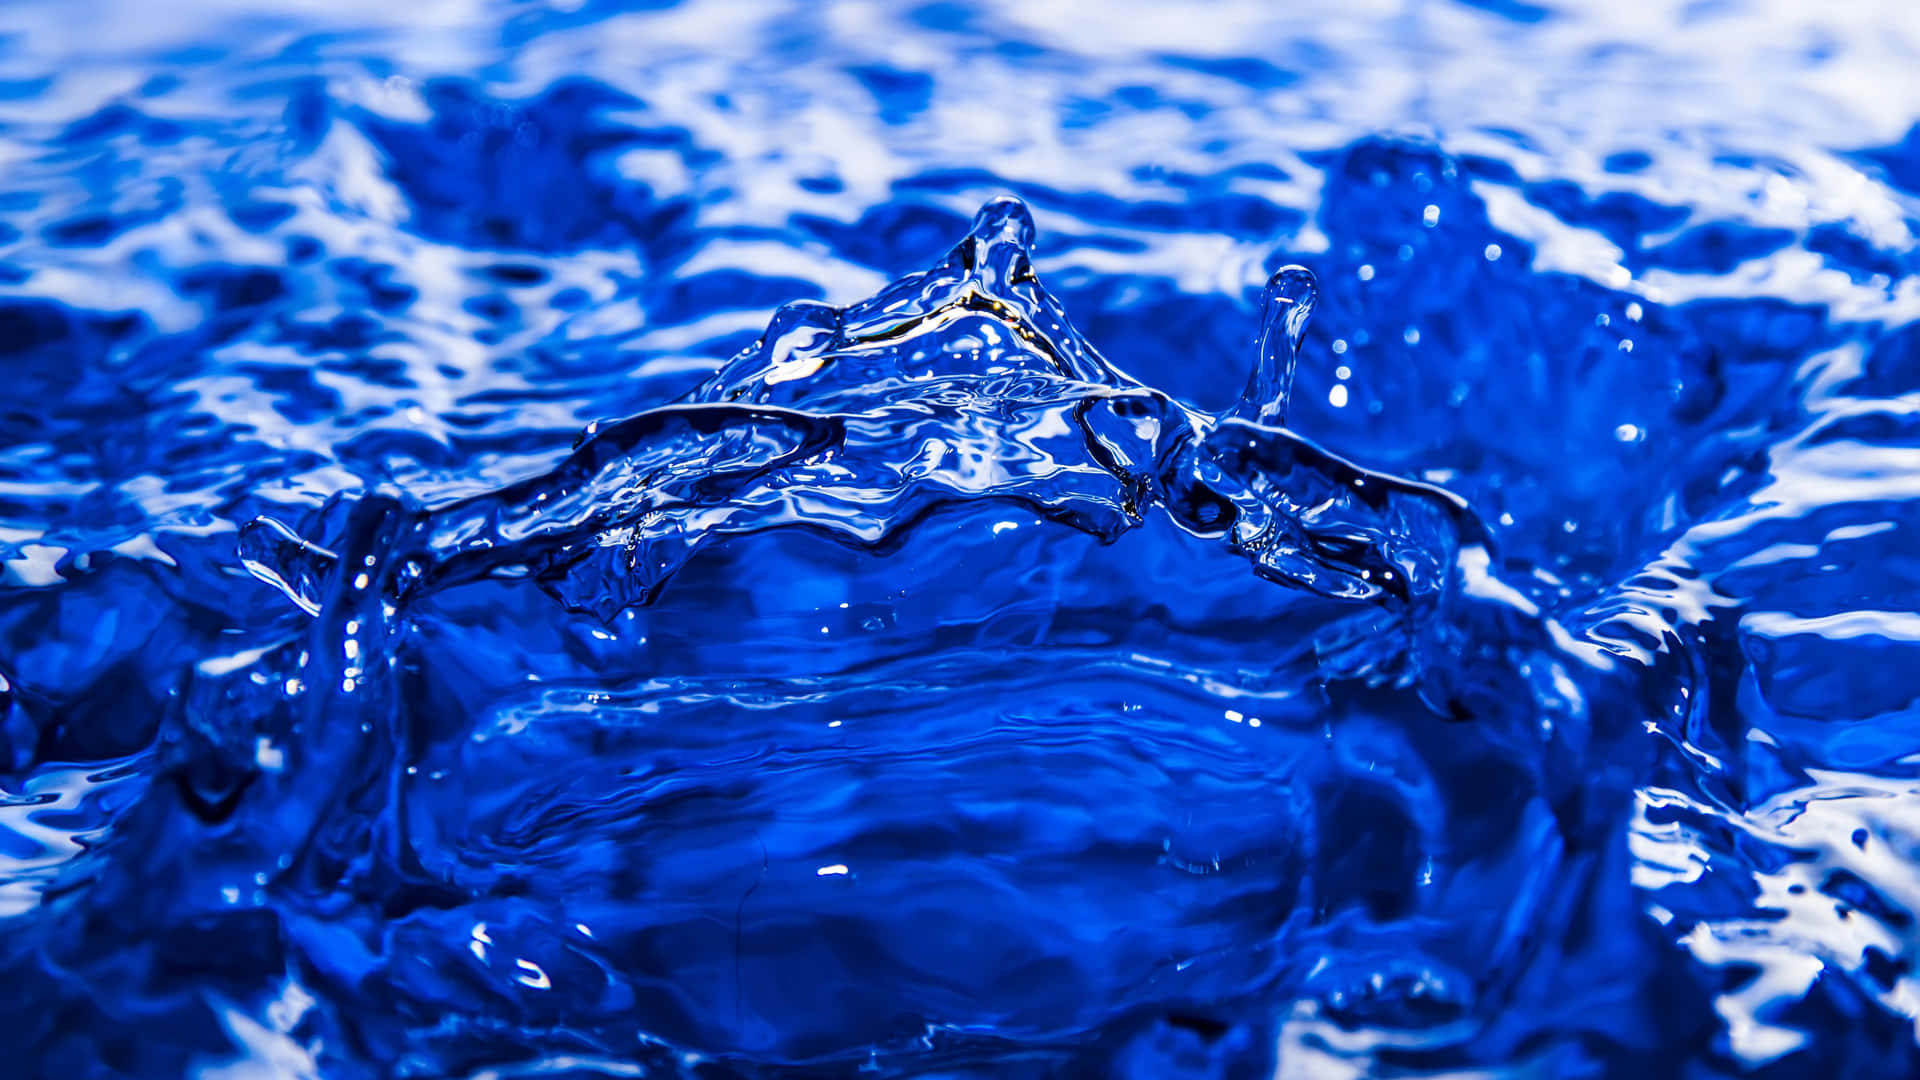 Blue Water Splashing On The Surface Of The Water